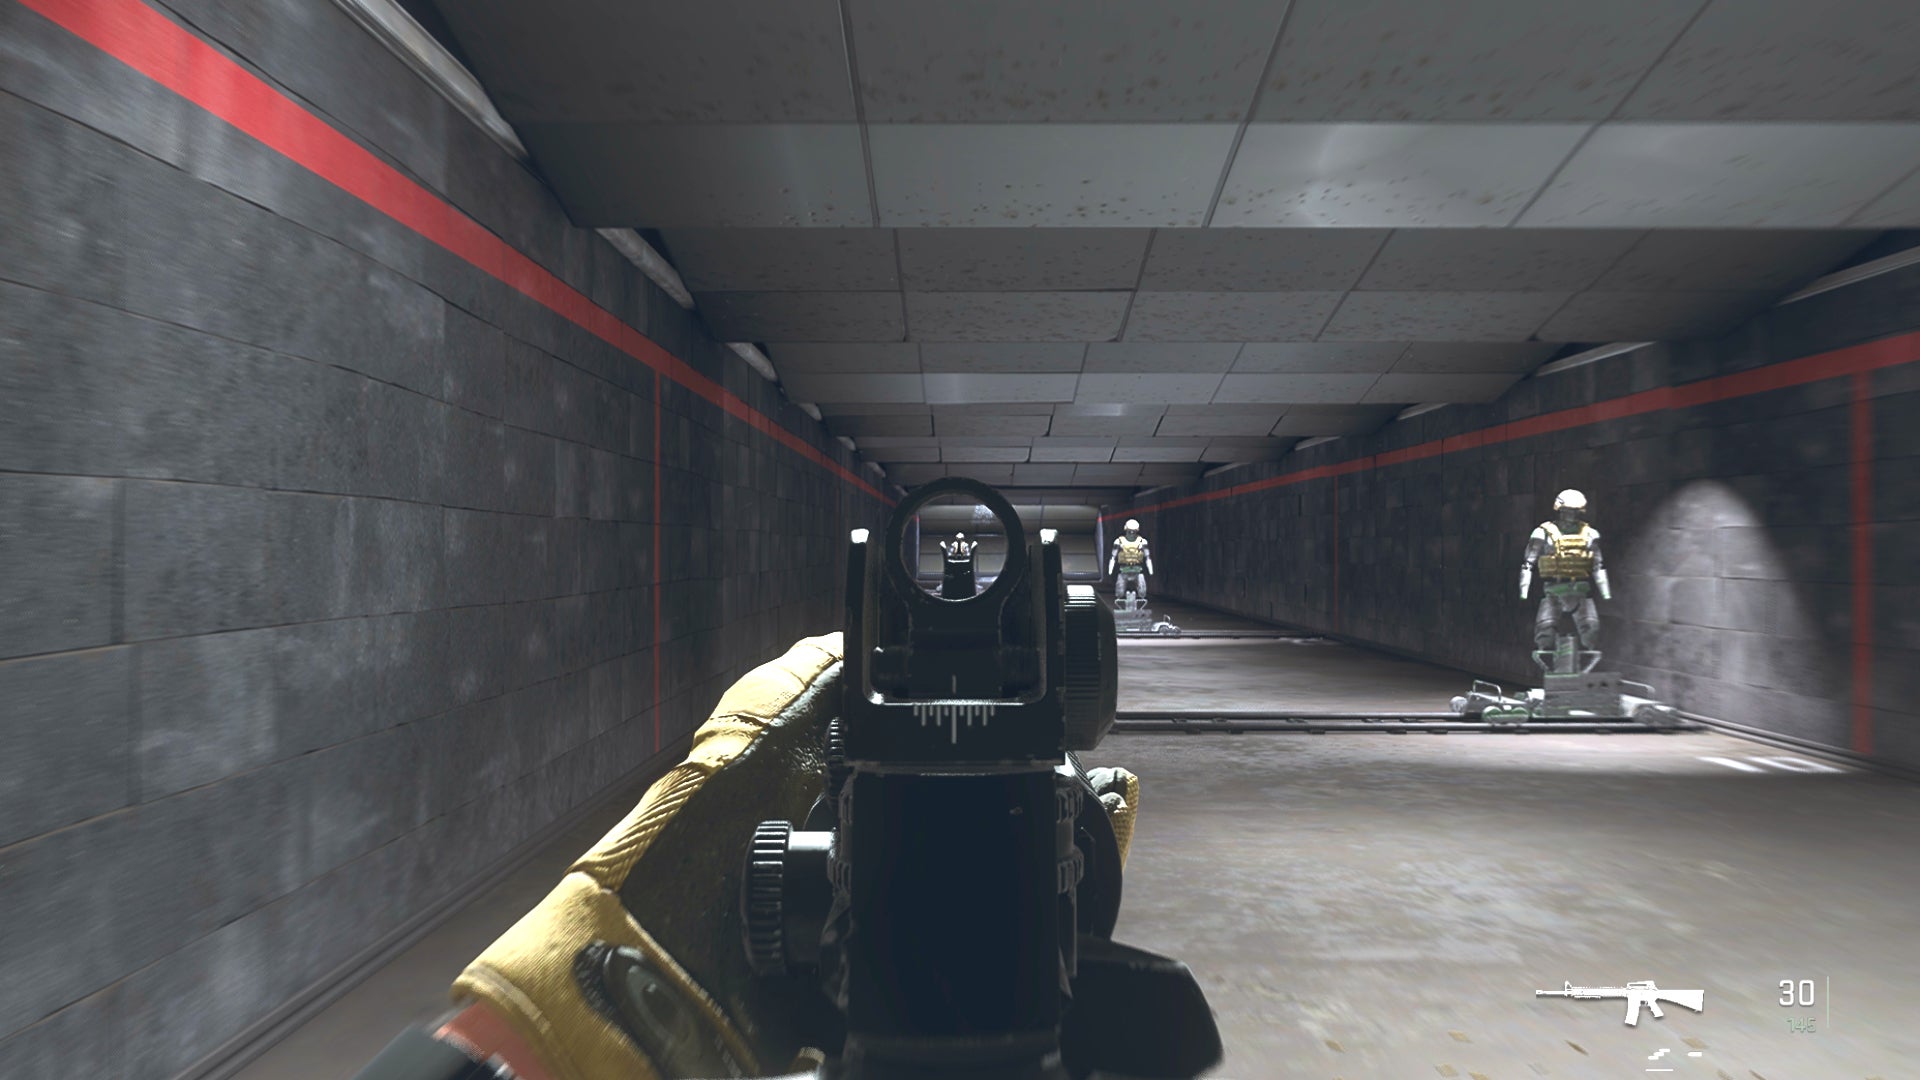 The player in Warzone 2.0 aims at a training dummy with the M16 ironsights.